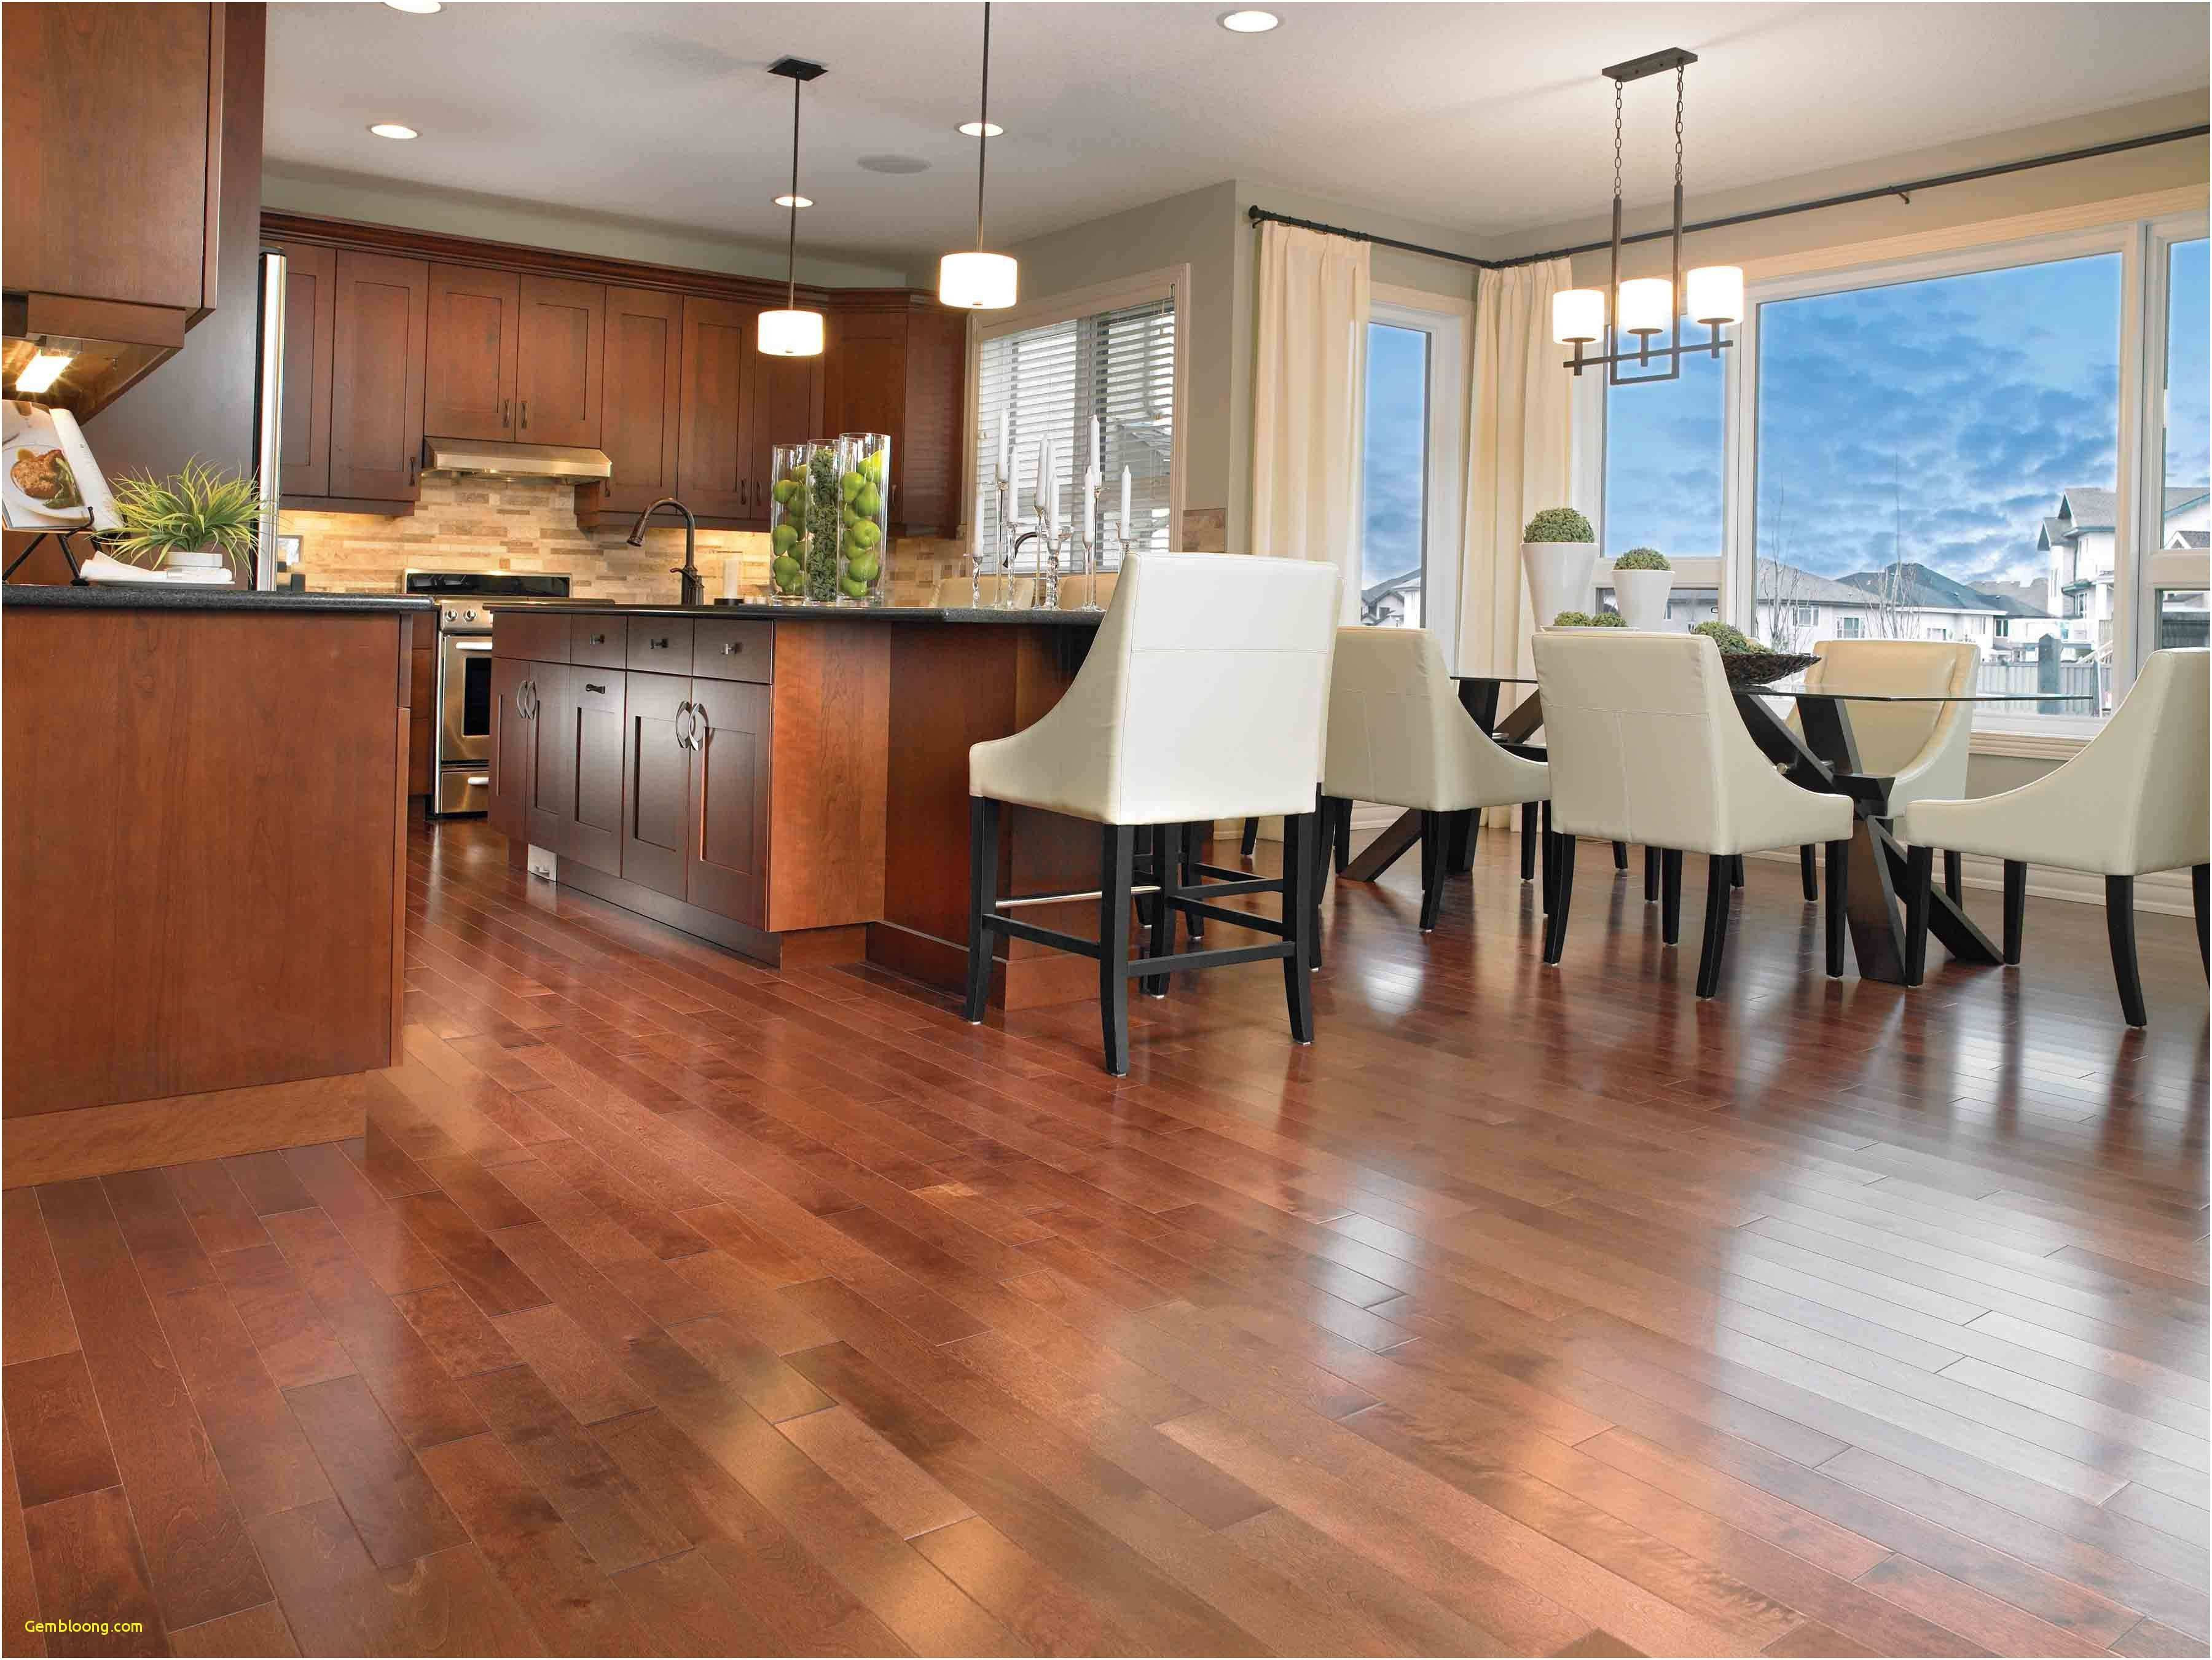 24 Lovely Hardwood Floor with Tile 2024 free download hardwood floor with tile of wood for floors facesinnature pertaining to furniture wood floors flooring nj furniture design hard wood flooring new 0d grace place